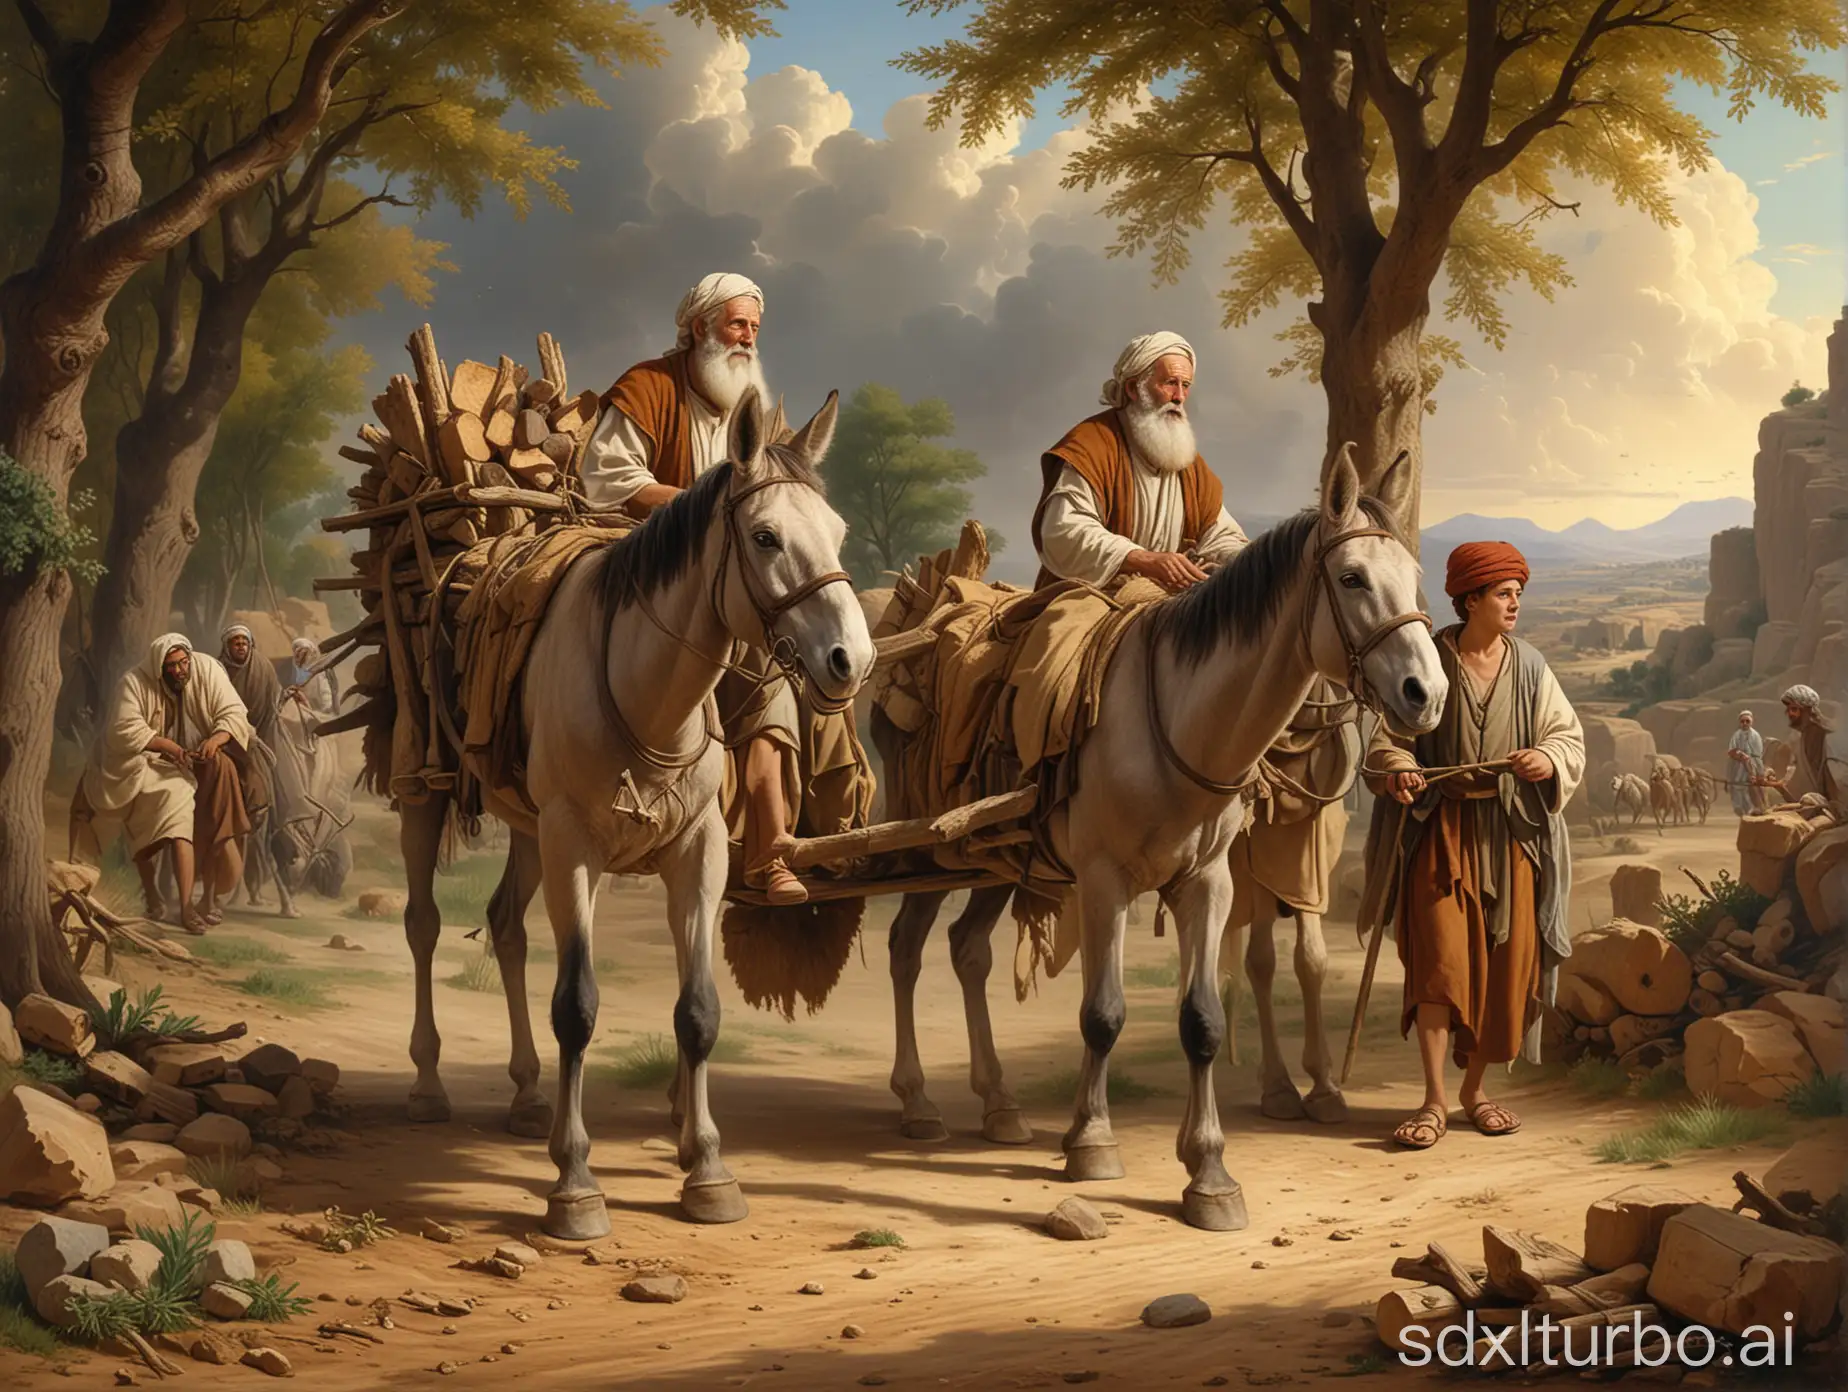 a biblical scene, the story of Abraham and Isaac. The old man in front with a staff, accompanied by the boy on a donkey and two other figures carrying firewood,